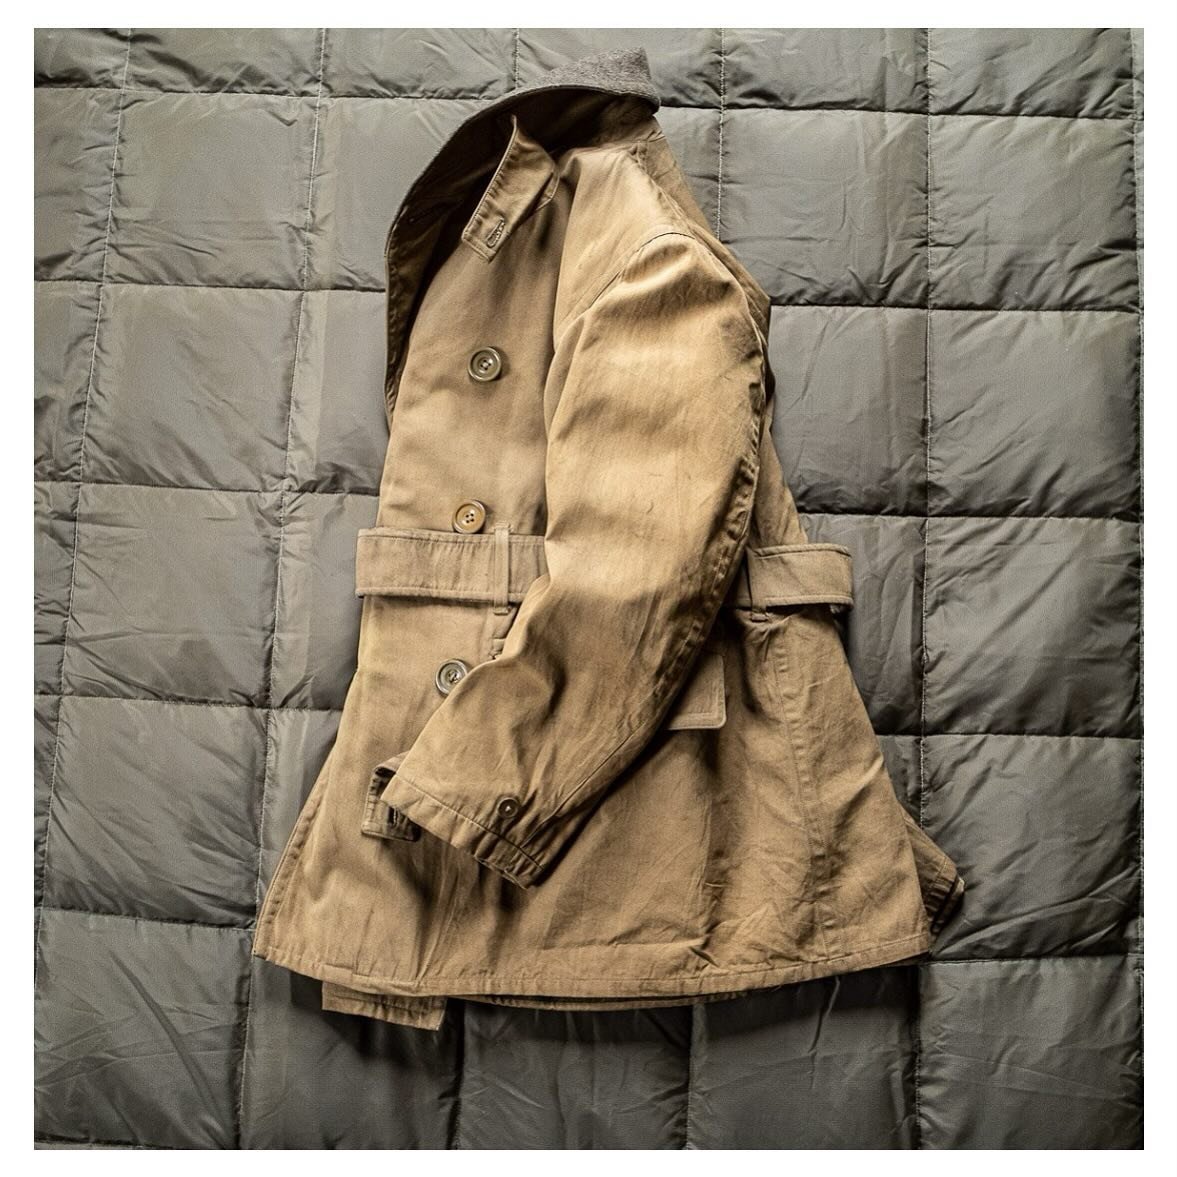 For Sale. Here is a good one that is sitting on the website right now. The incredibly hard to find British-Made US Army Jeep Coat Mackinaw from 1944. 

Beautiful khaki shell, immaculate wool lining, and British Broad Arrow tag all intact. Available n